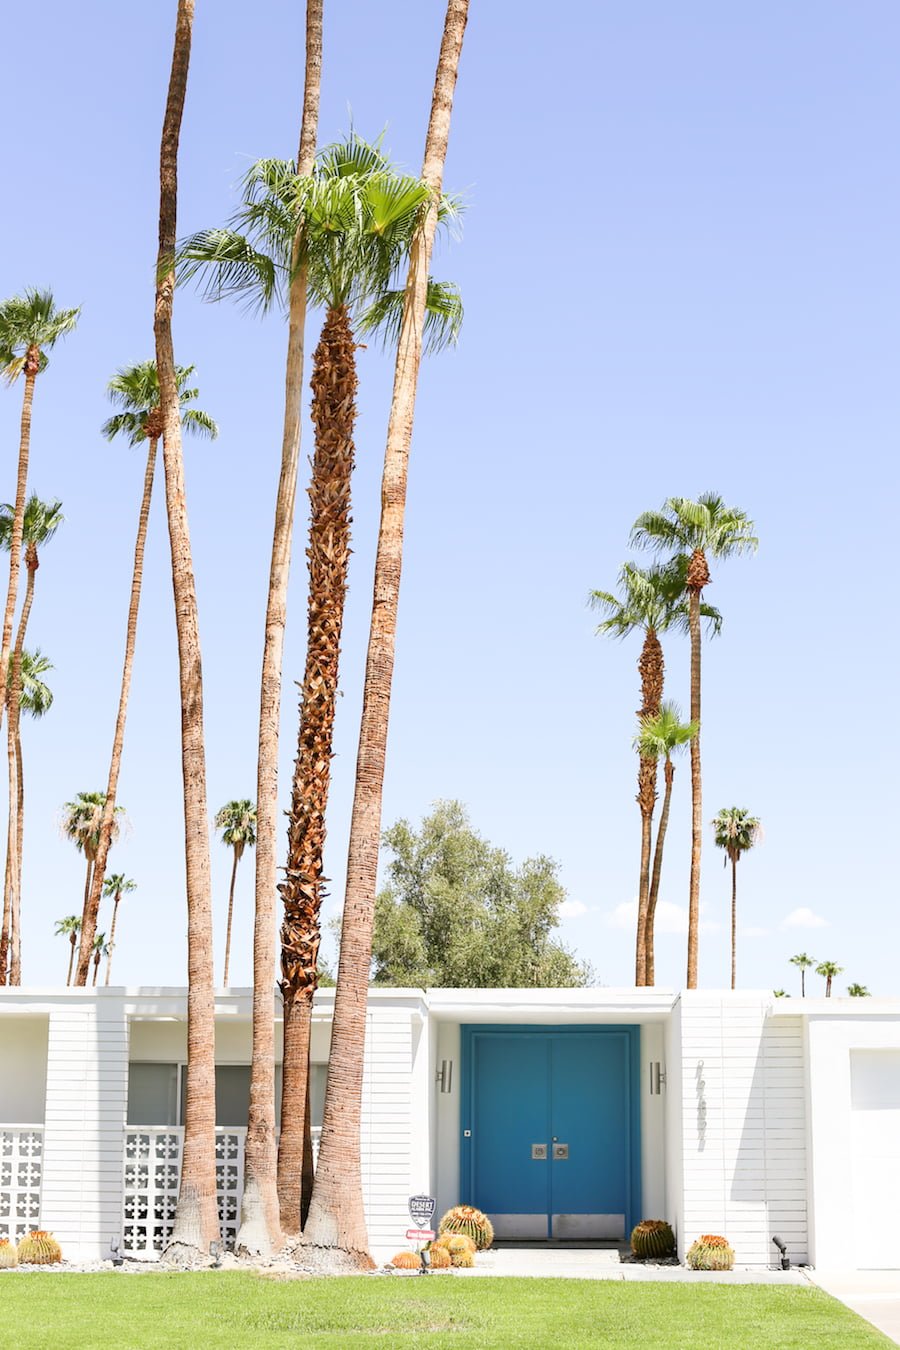 Take a Palm Springs Door Tour to see all the bright & colorful midcentury modern front doors, Instagram Photos, Insta-worthy, Driving Tour, Architecture Tour, Weekend Trip, Palm Springs Guide, Travel Guide, What to do in Palm Springs, Walking Door, Photo Tour, That Pink Door Address, Free Printable Map, Salty Canary 